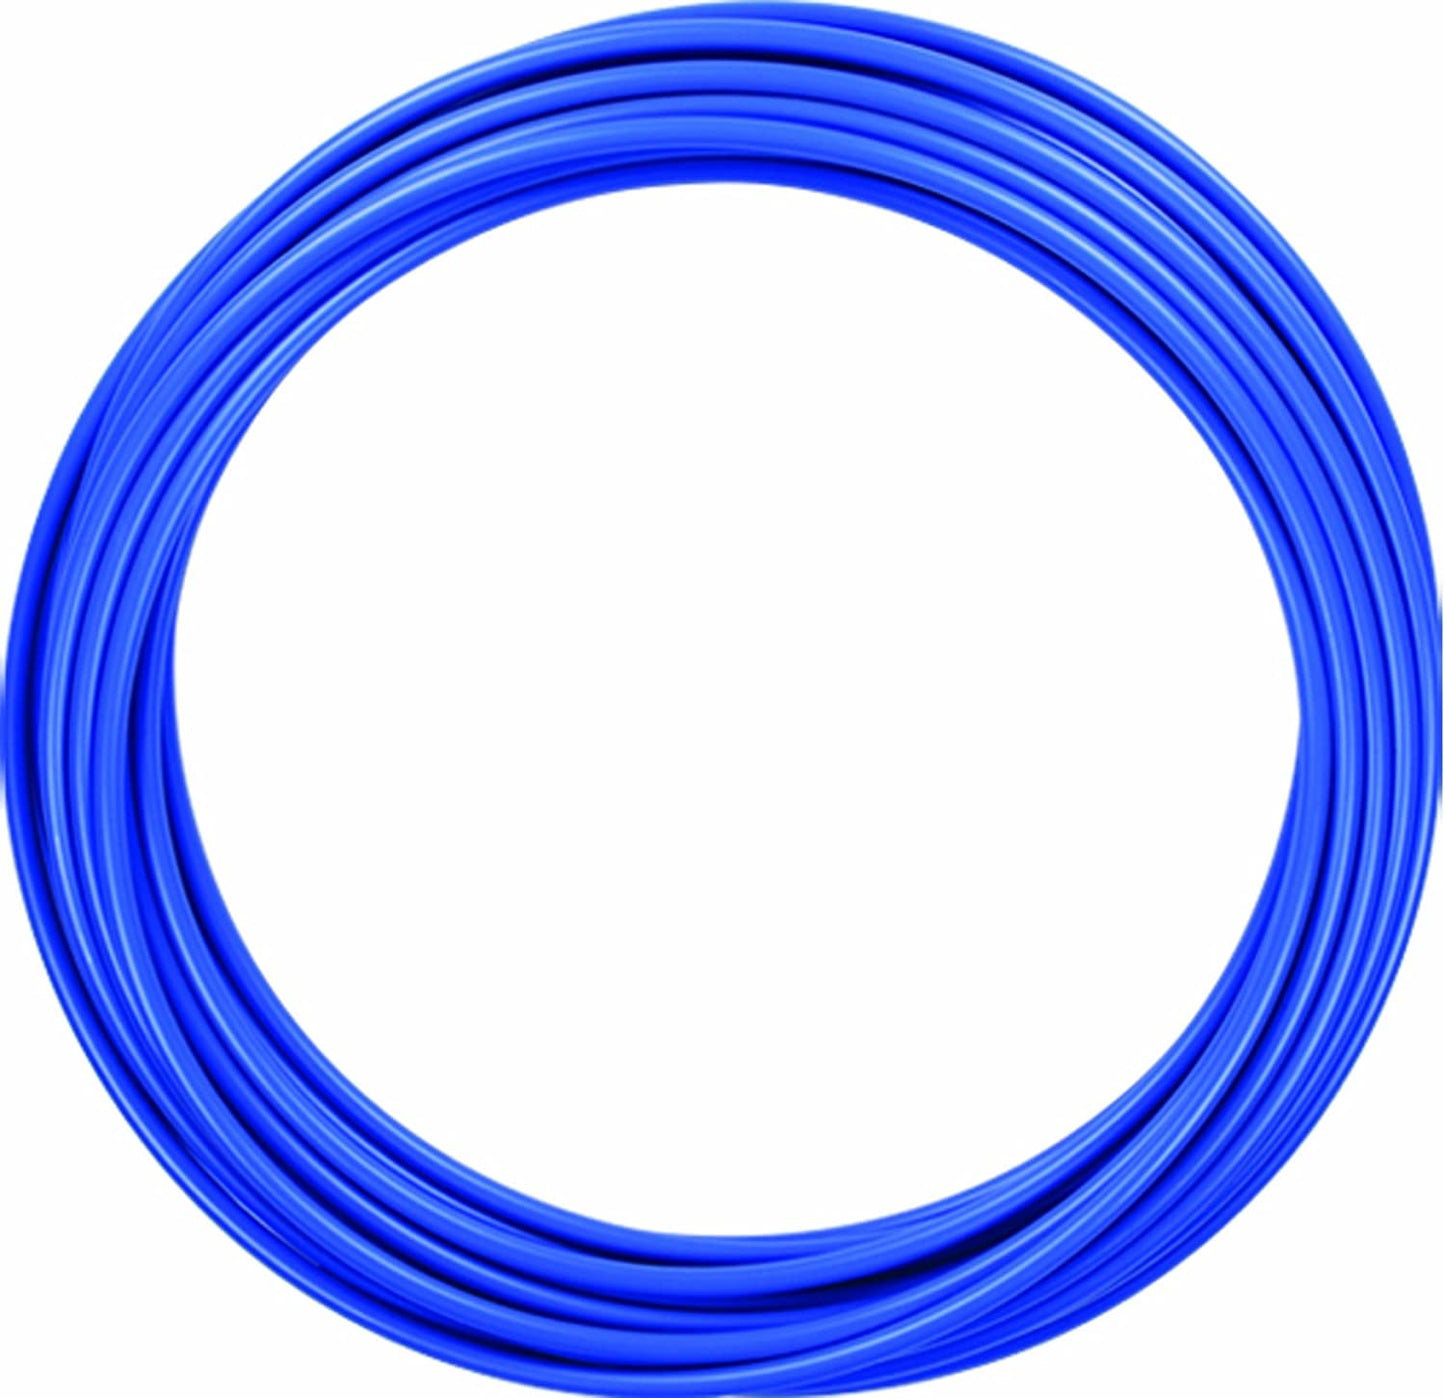 32223 PureFlow Zero Lead ViegaPEX Tubing with Blue Coil of Length 1/2" by 300-Feet